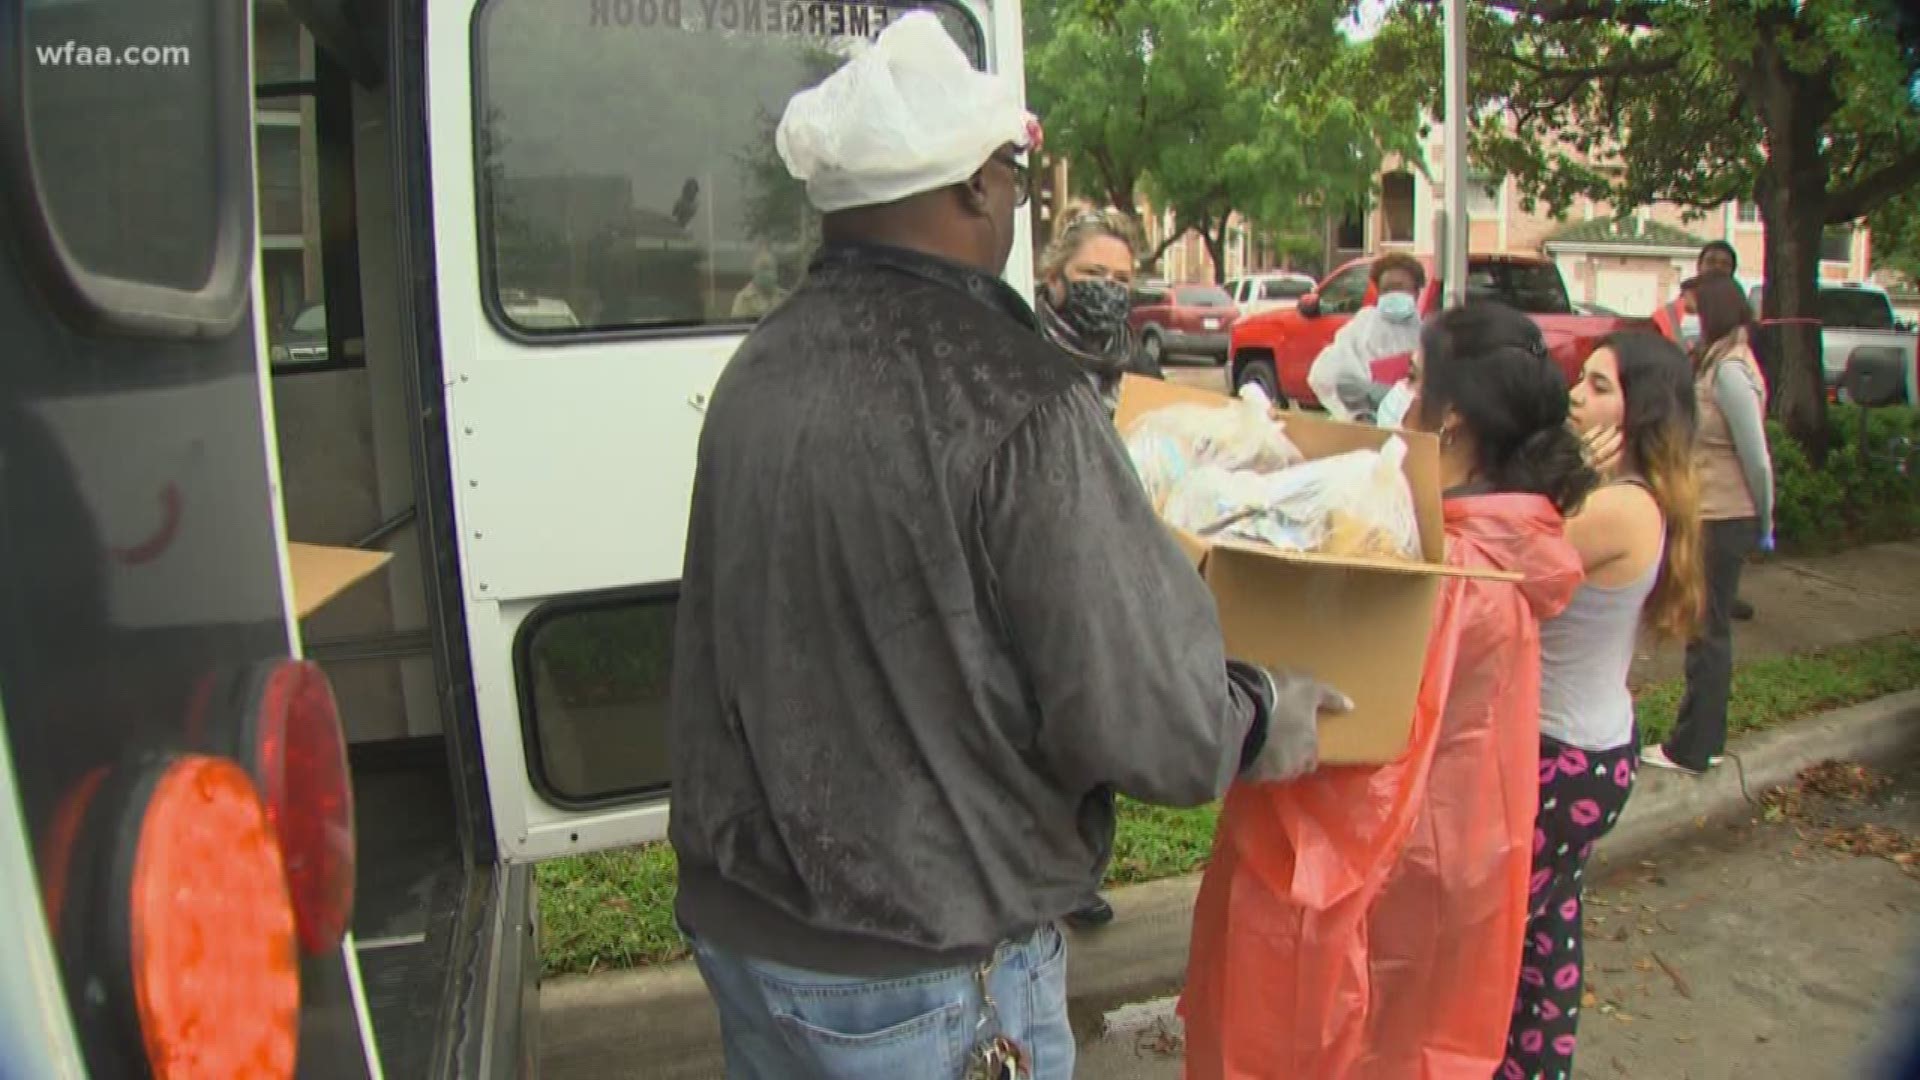 The pilot program aims to reach families who aren't able to visit DISD's Grab-and-Go meal sites. Students get three meals for three days before the next delivery.